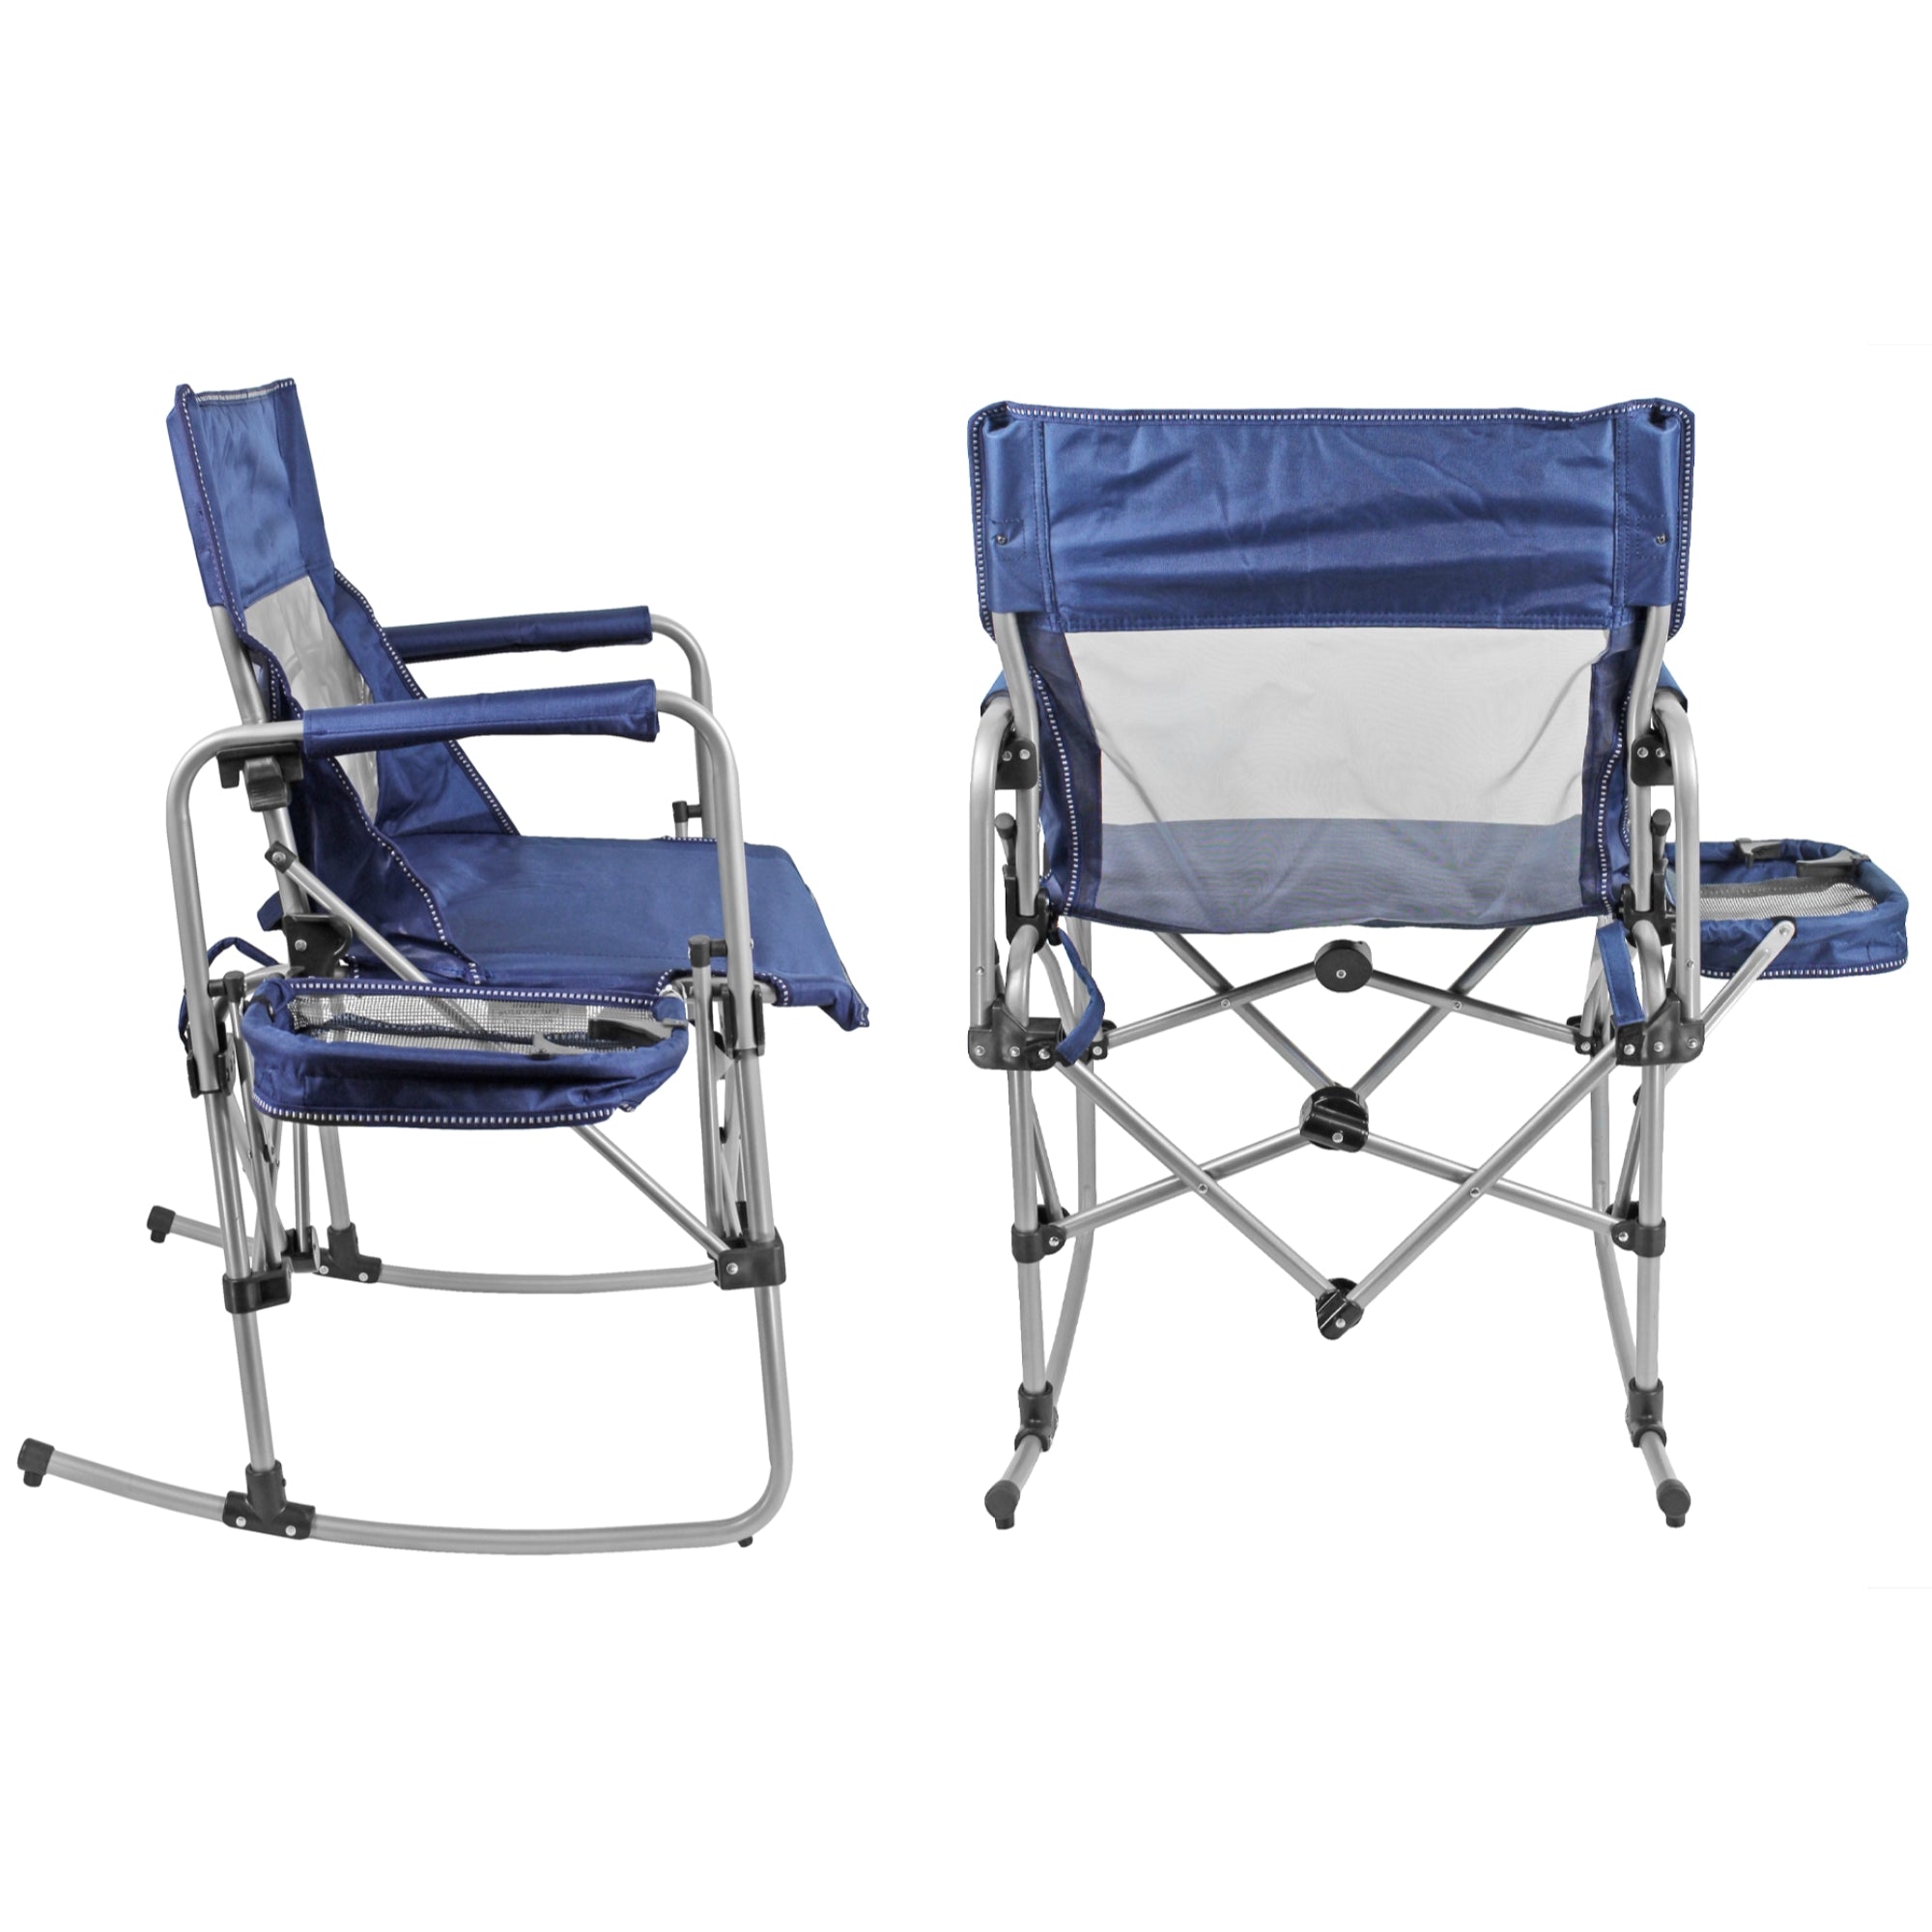 Zenithen Limited Navy/Grey Rocking Director Folding Chair with Side Table